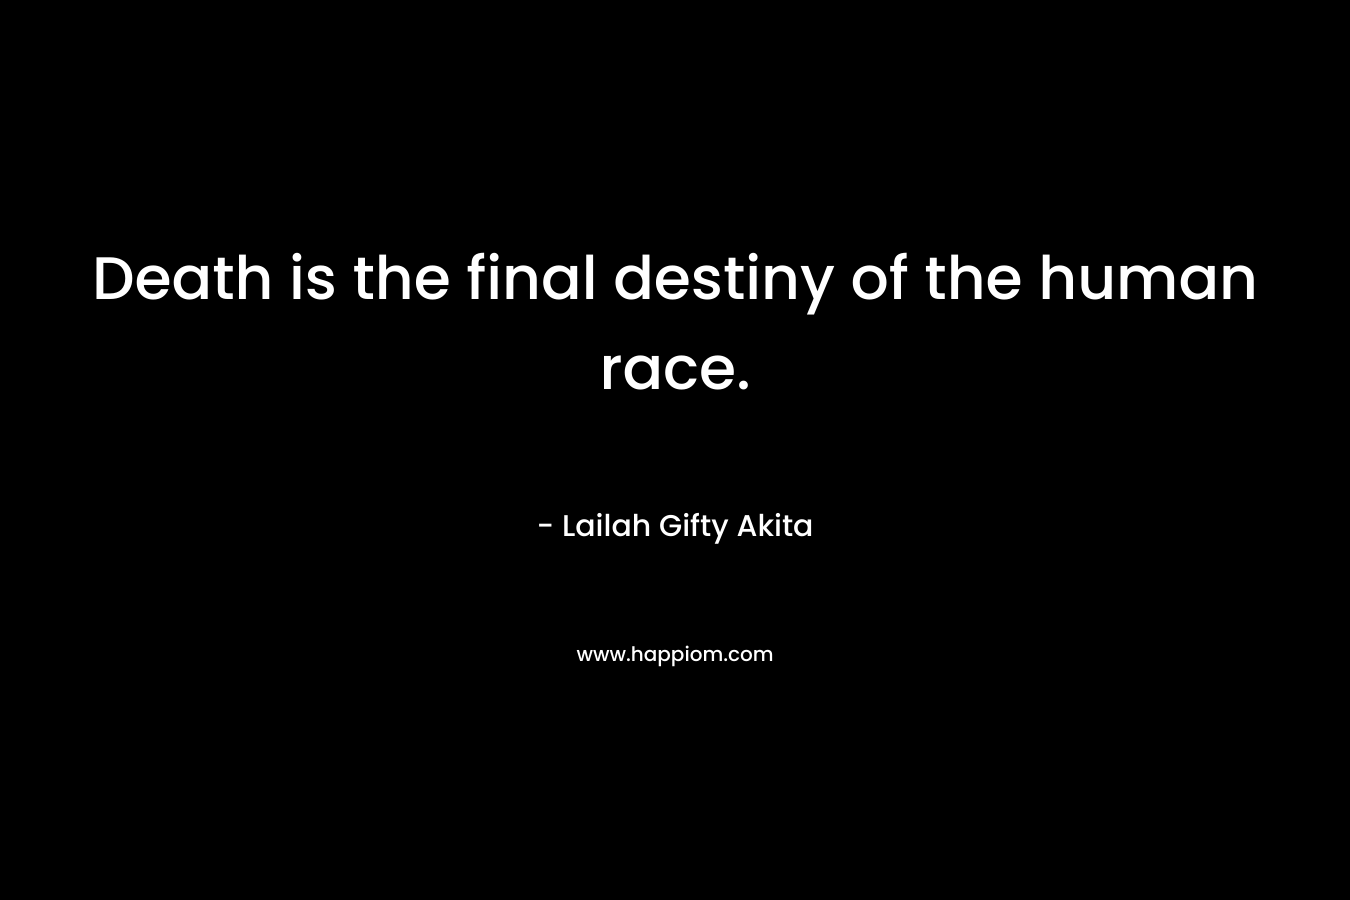 Death is the final destiny of the human race.